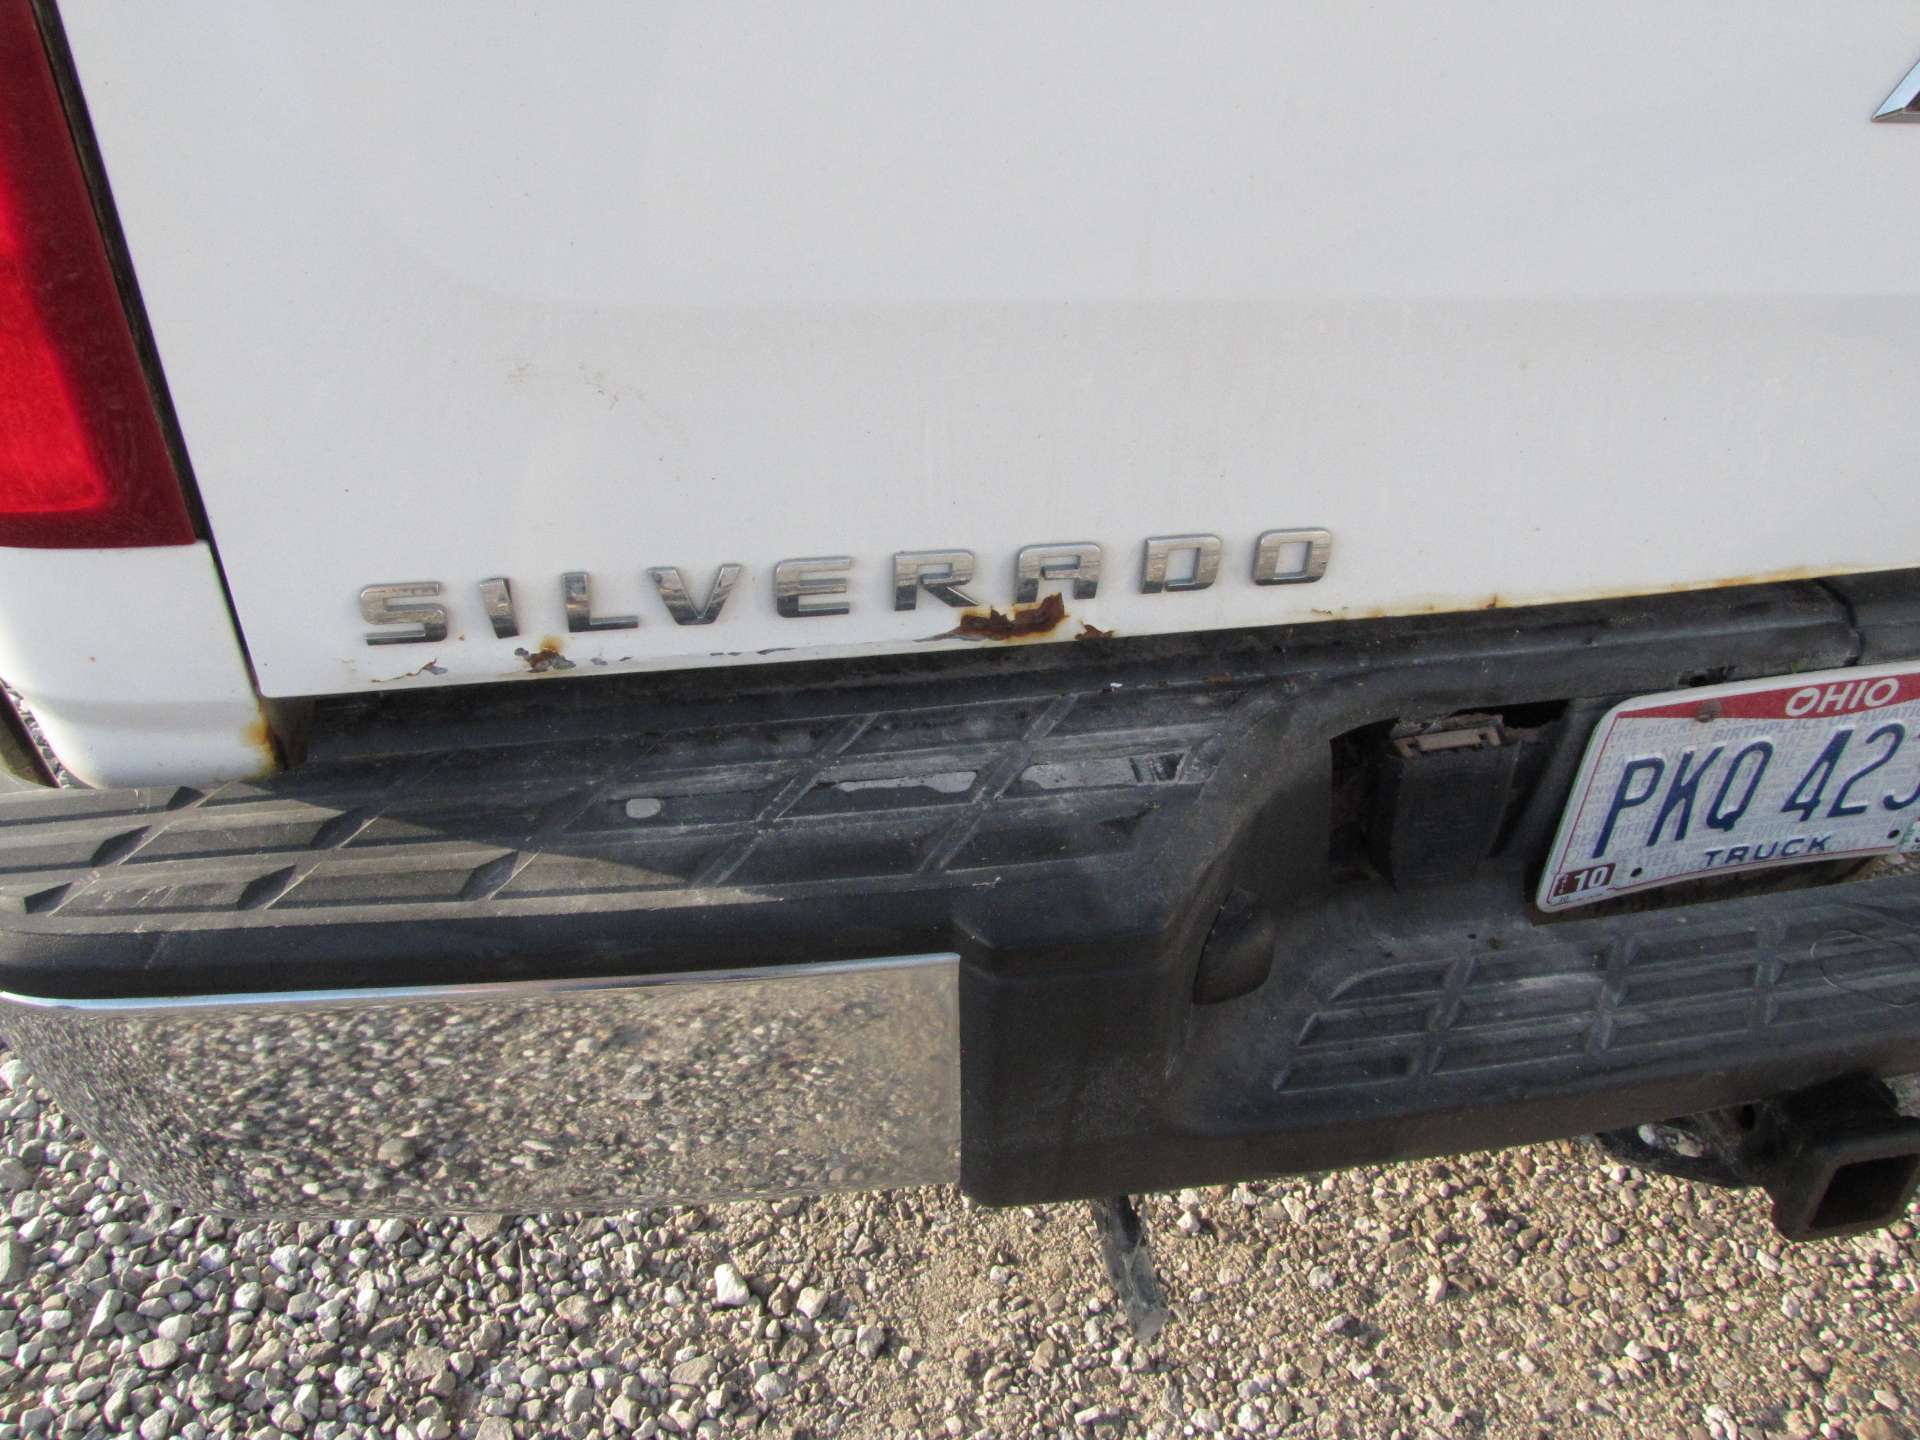 2008 Chevy Silverado 1500 LT Pickup Truck (CRACKED FRAME) - Image 23 of 43